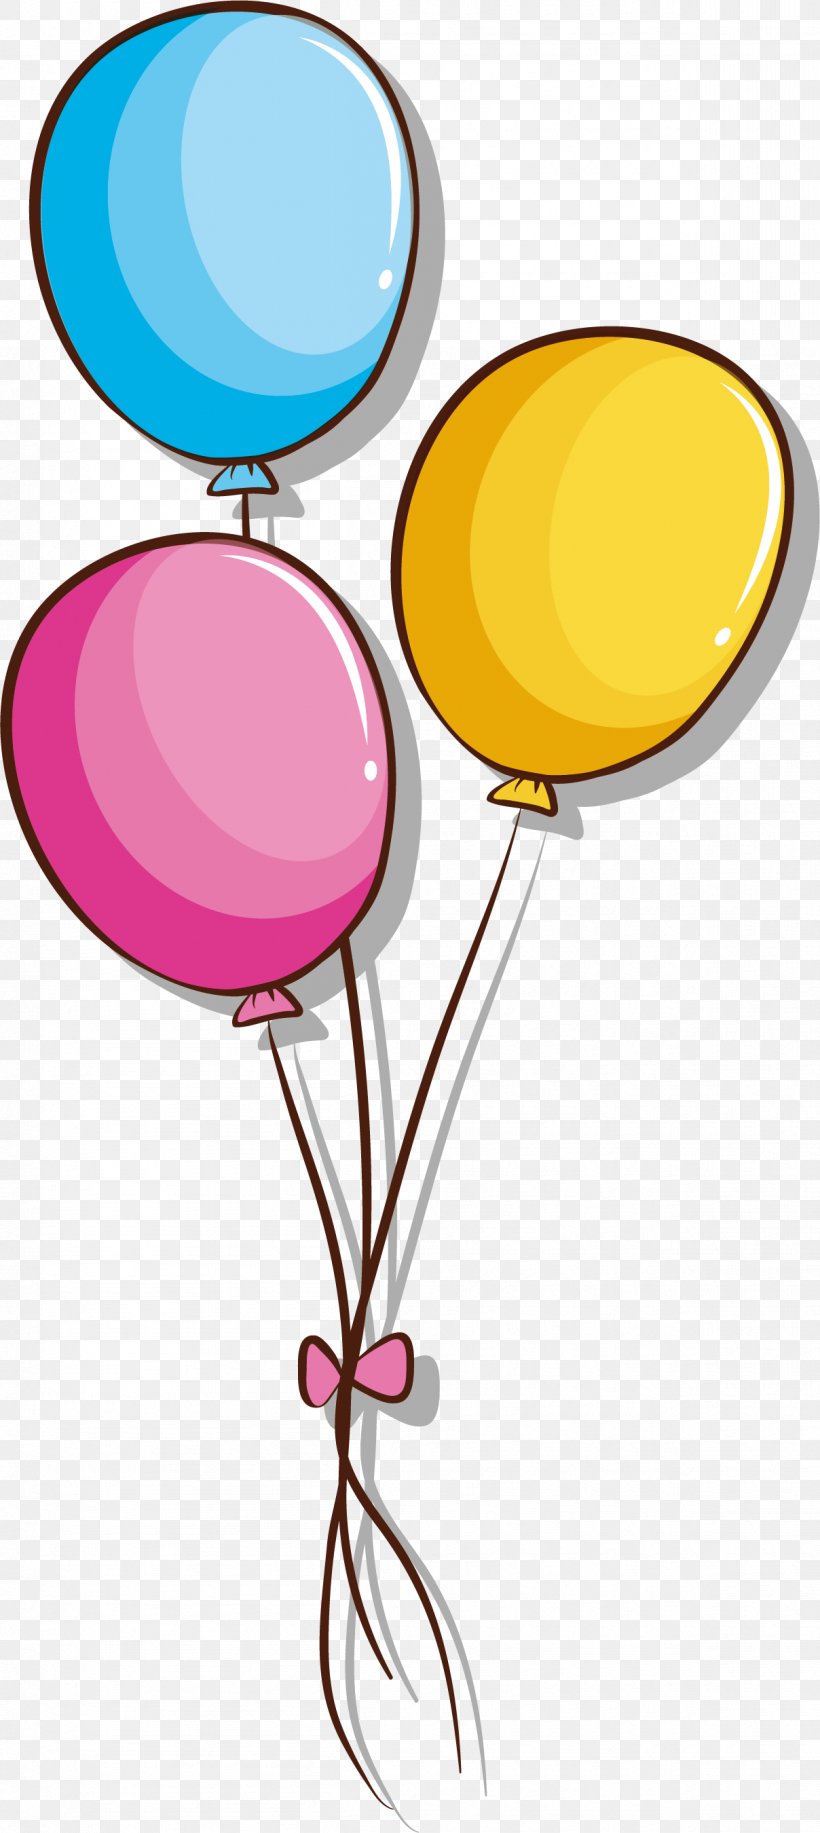 Drawing Toy Balloon Illustration, PNG, 1208x2701px, Drawing, Balloon, Color, Party Supply, Photography Download Free